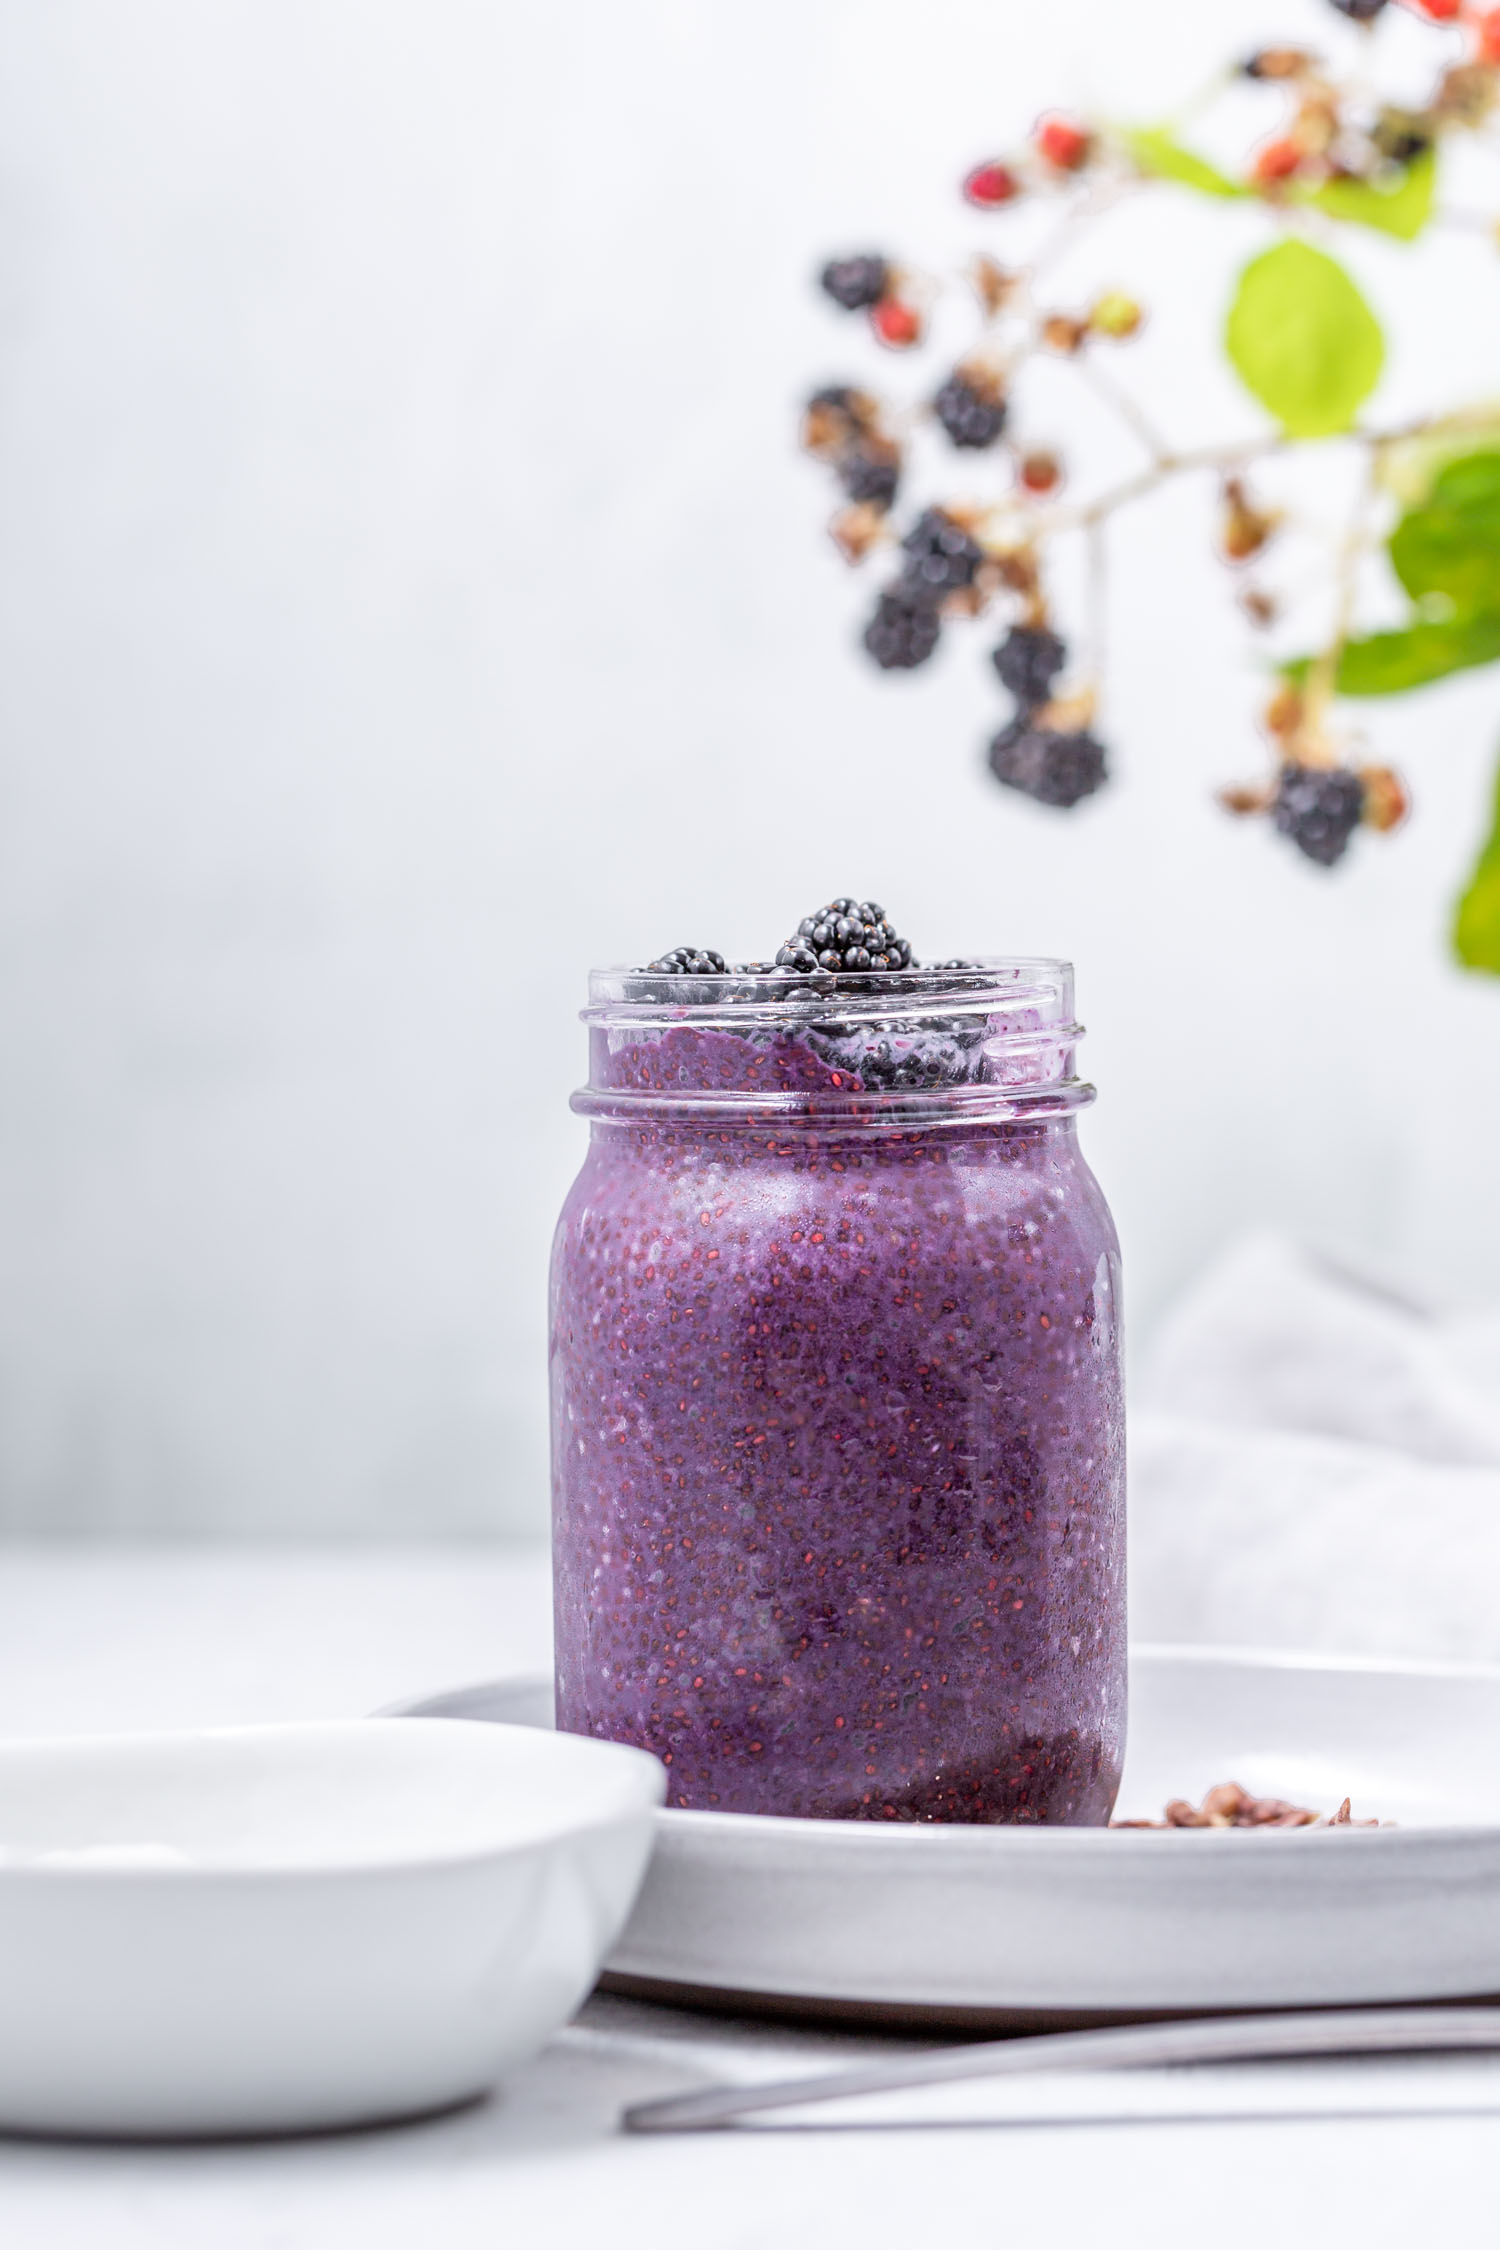 This Blackberry Chia Pudding recipe is vegan, quick, easy, gluten-free, refined sugar-free, and grain-free, requires 10 ingredients or less, only 15 minutes or less time in the kitchen, is a seasonal summer recipe that can be made year-round with frozen berries, and makes a great breakfast, snack, or dessert. #chiapudding #blackberry #vegan #breakfast